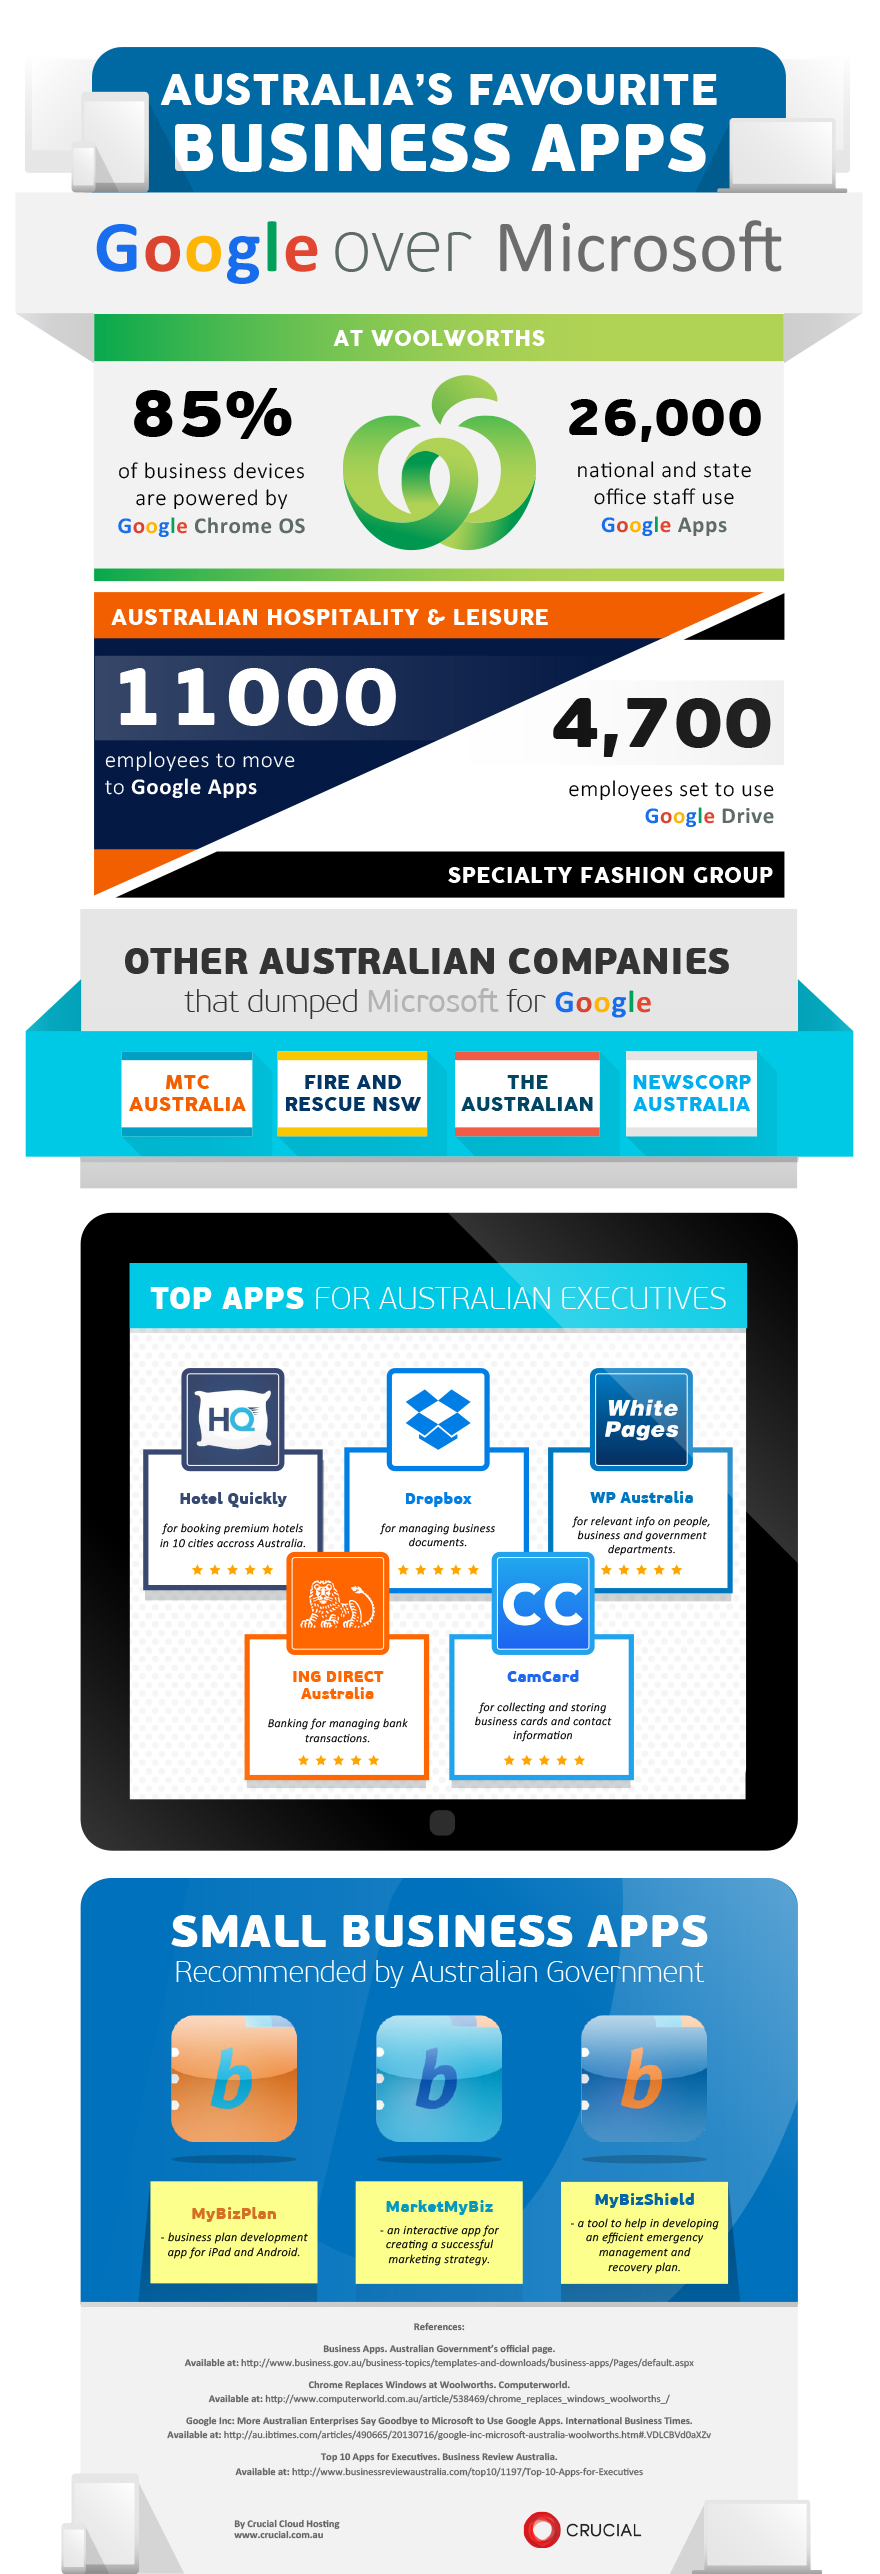 Infographic Australia’s Favorite Business Apps | Crucial